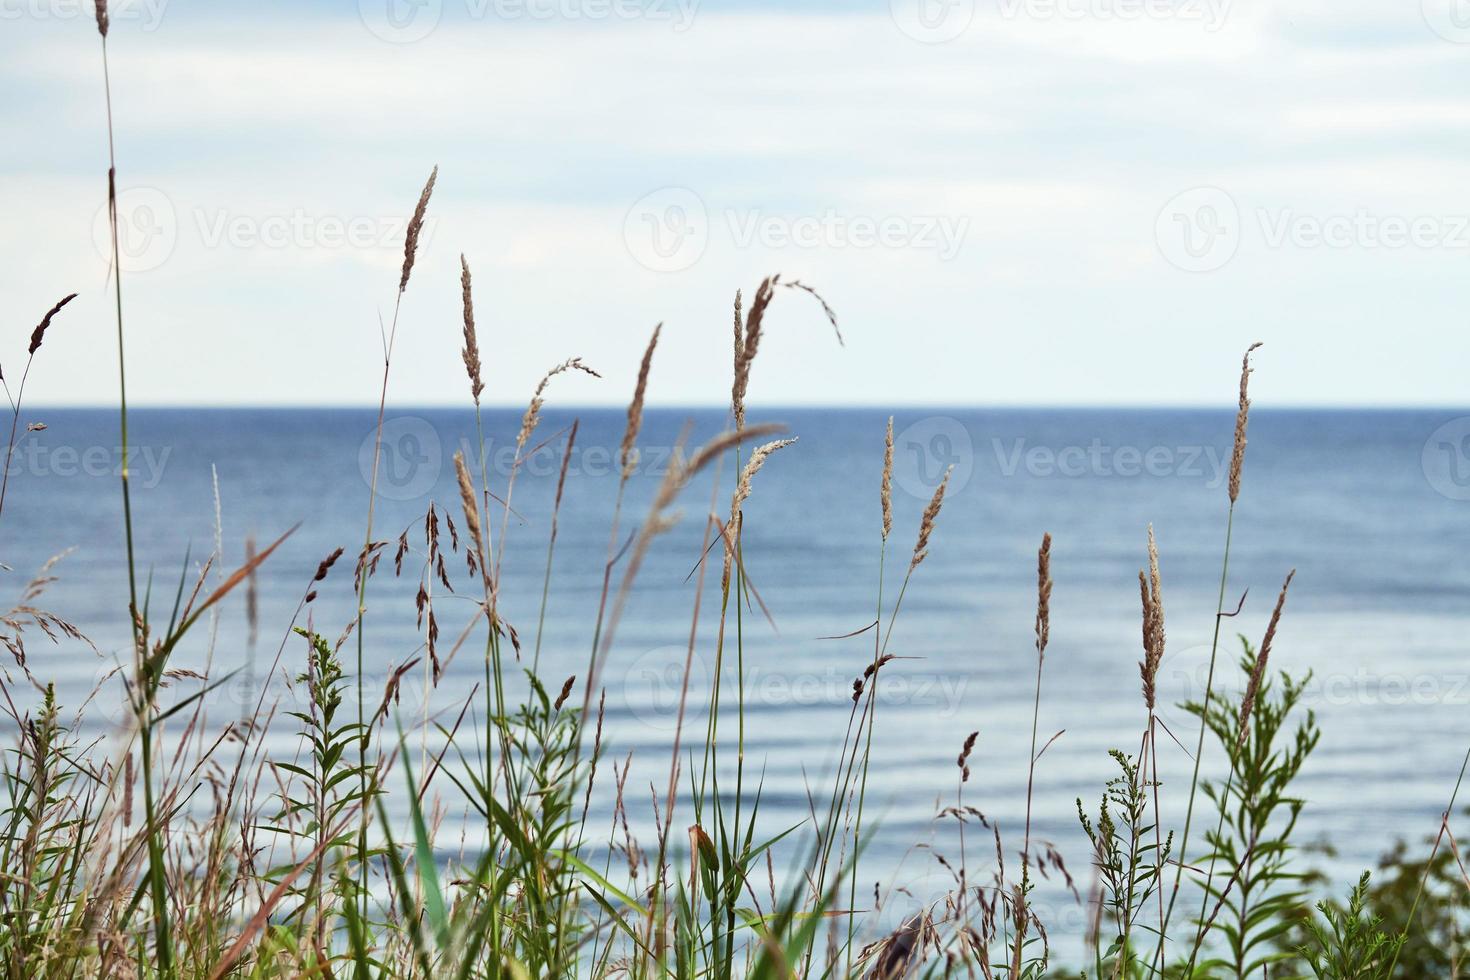 Green grass, reeds, stalks blowing in wind, horizontal, blurred sea background, autumn dry grass photo